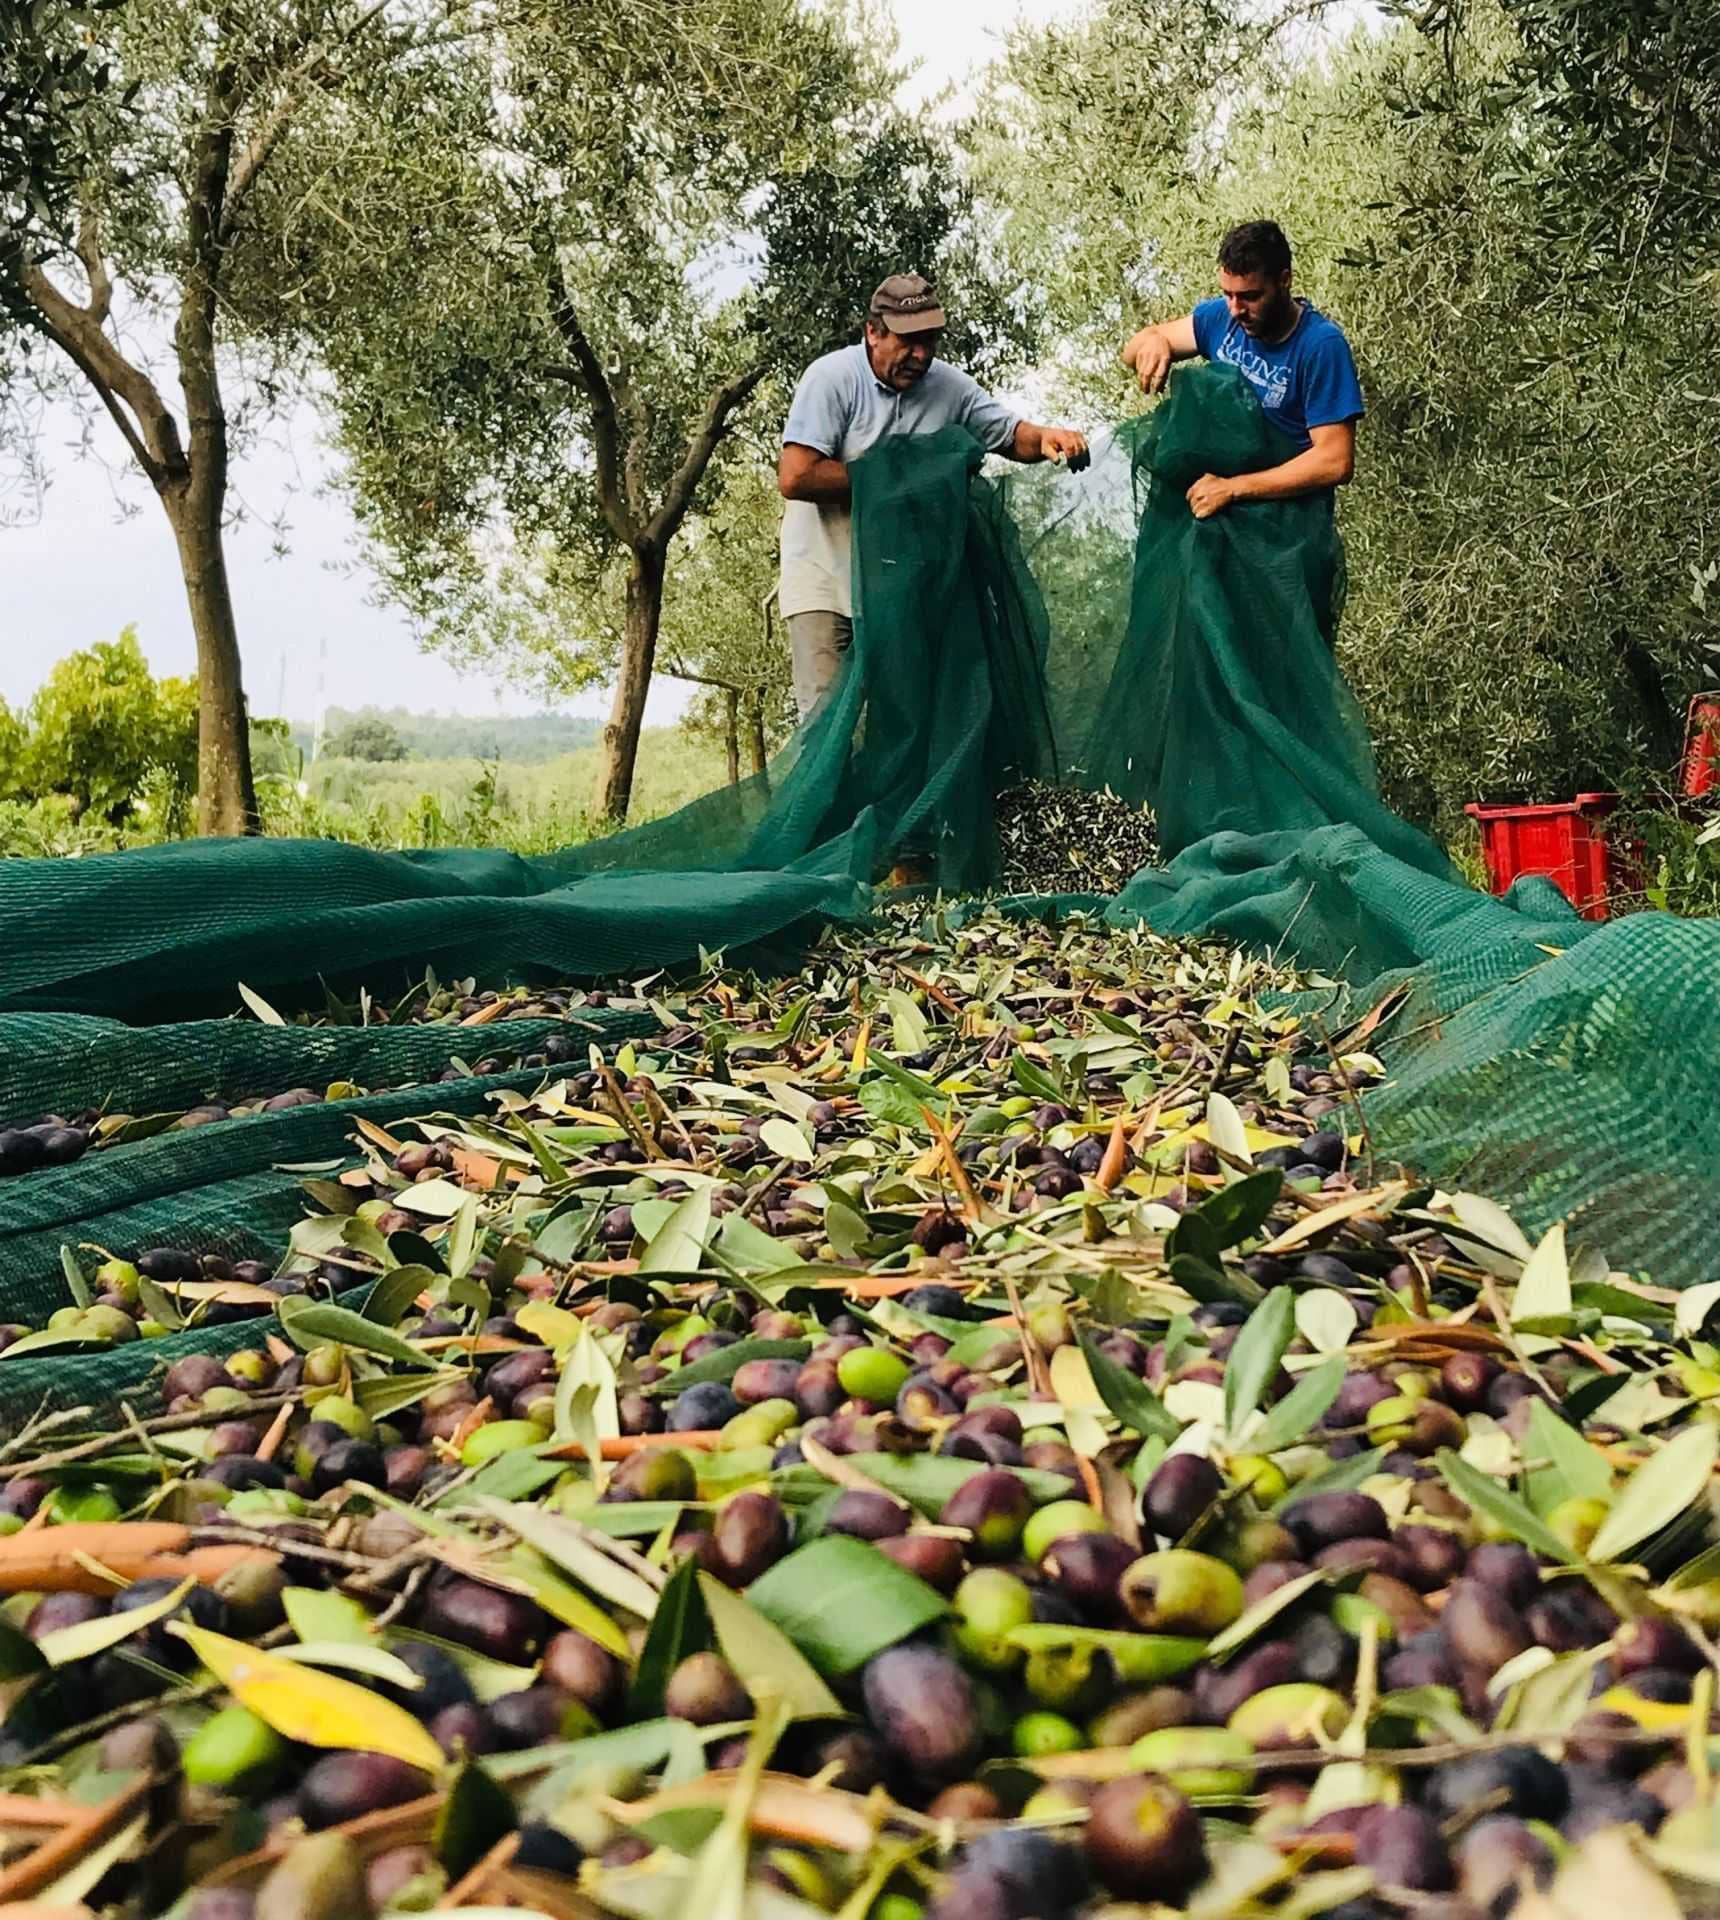 europe-the-best-olive-oils-competitions-croatian-producers-celebrate-87-wins-at-world-competition-olive-oil-times